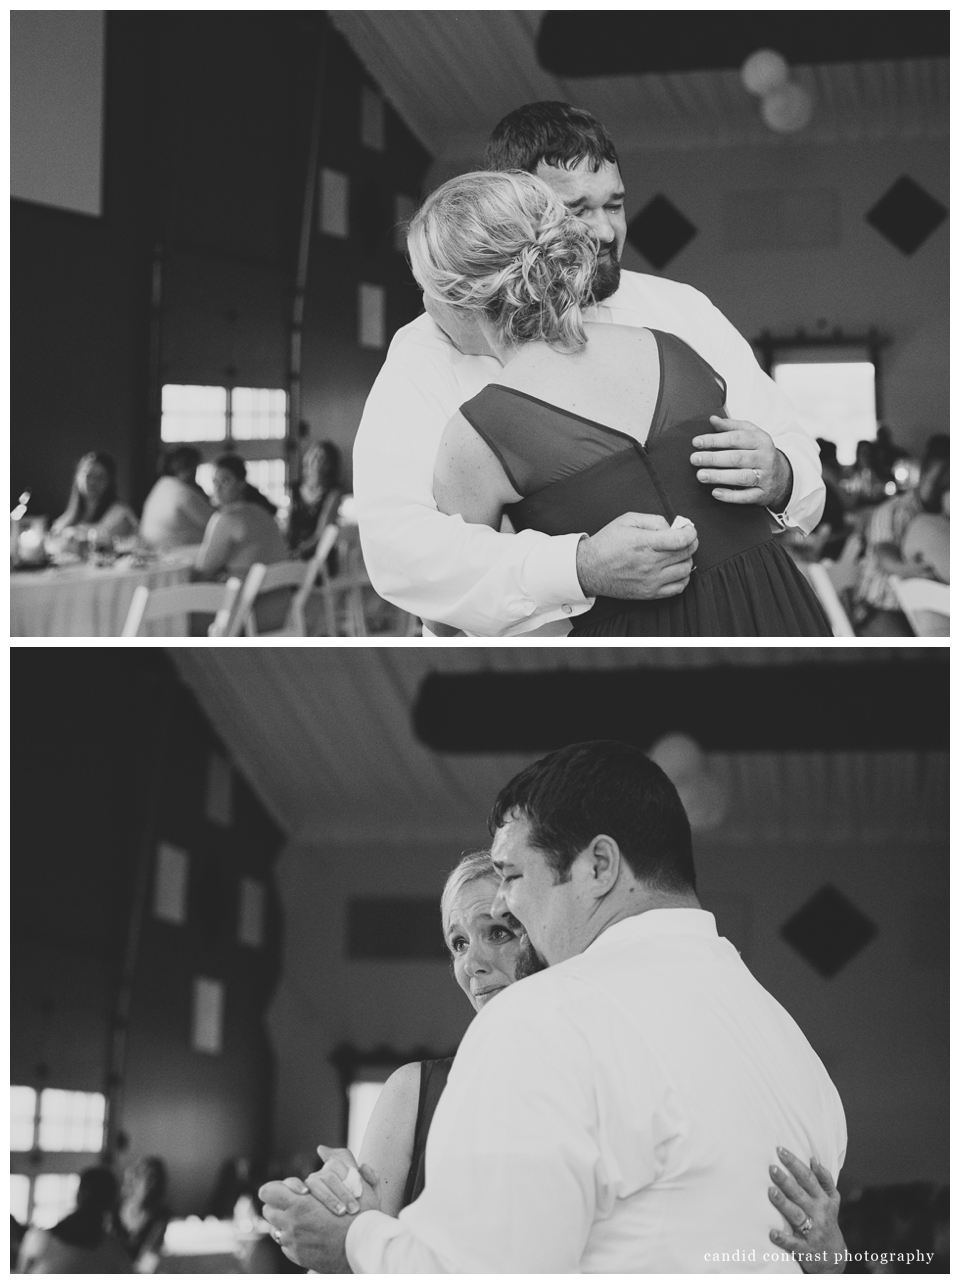 candid contrast photography, memorial dance at the shore event centre bellevue ia wedding